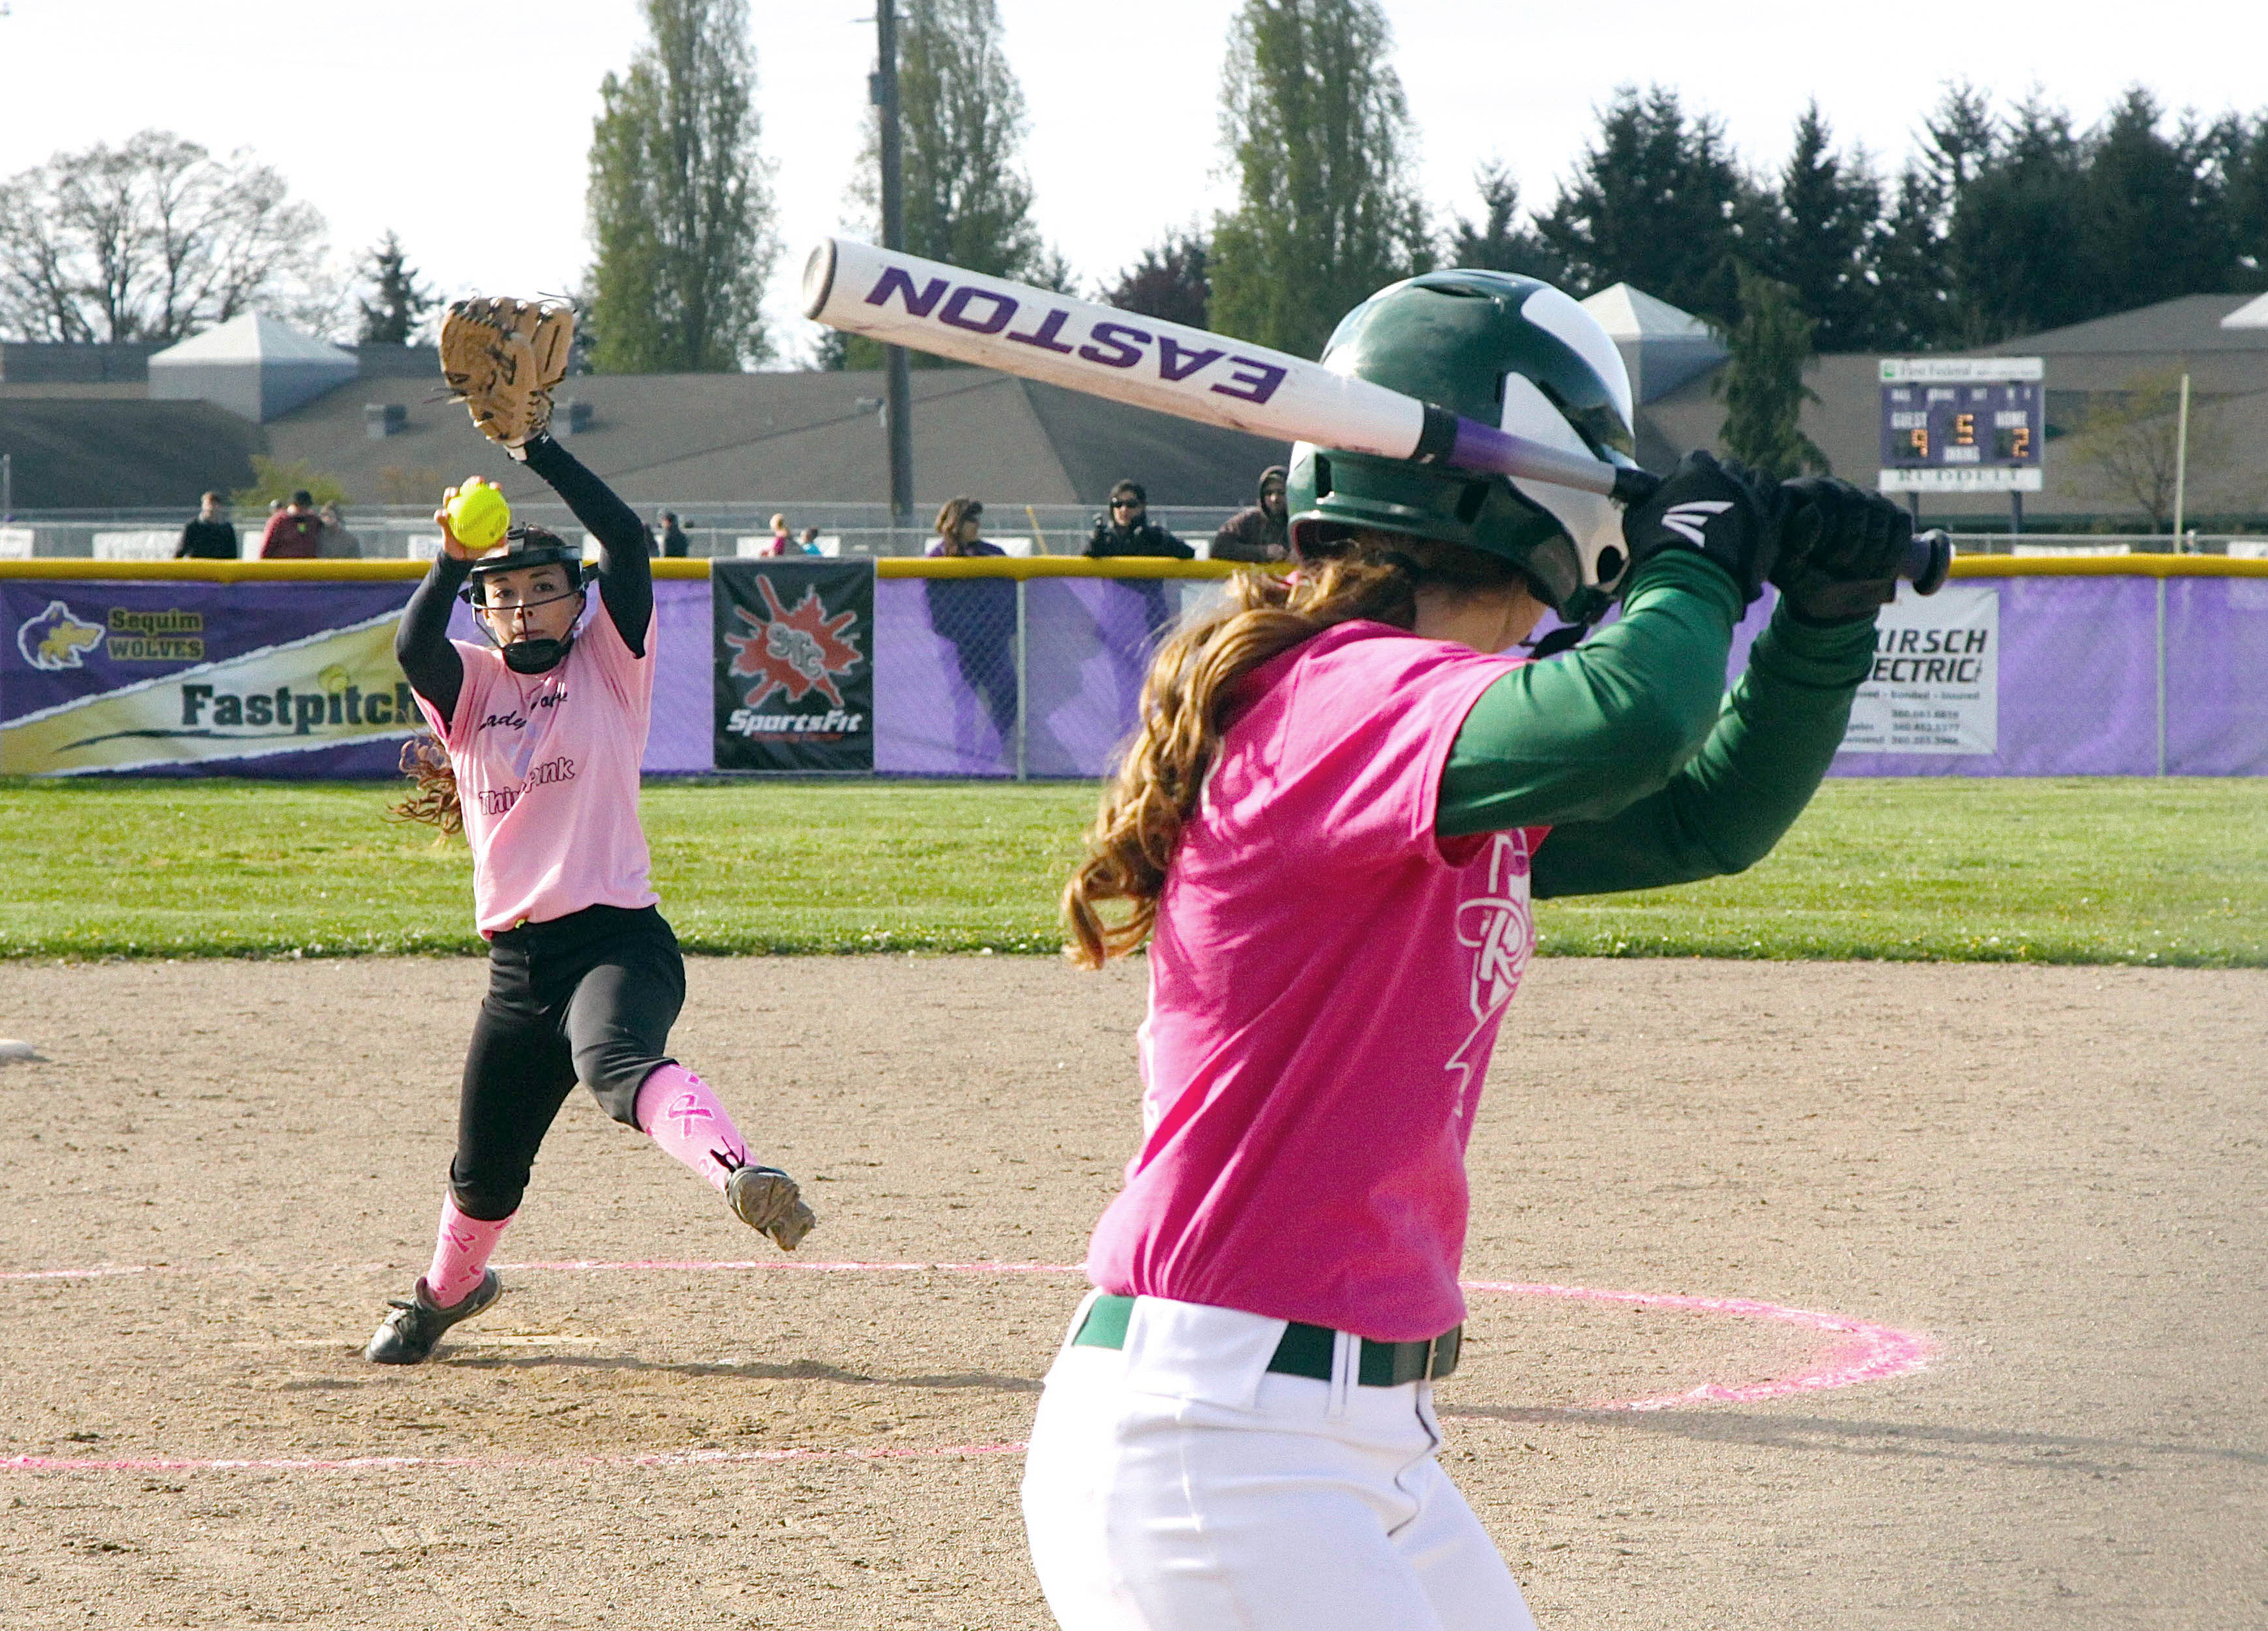 Sequim pitcher Makayla Bentz winds up to deliver to Port Angeles batter Tori Kuch. The Roughriders got the best of their rivals in a 5-0 win. The two teams wore pink uniforms in an effort to promote cancer awareness. Dave Logan/for Peninsula Daily News